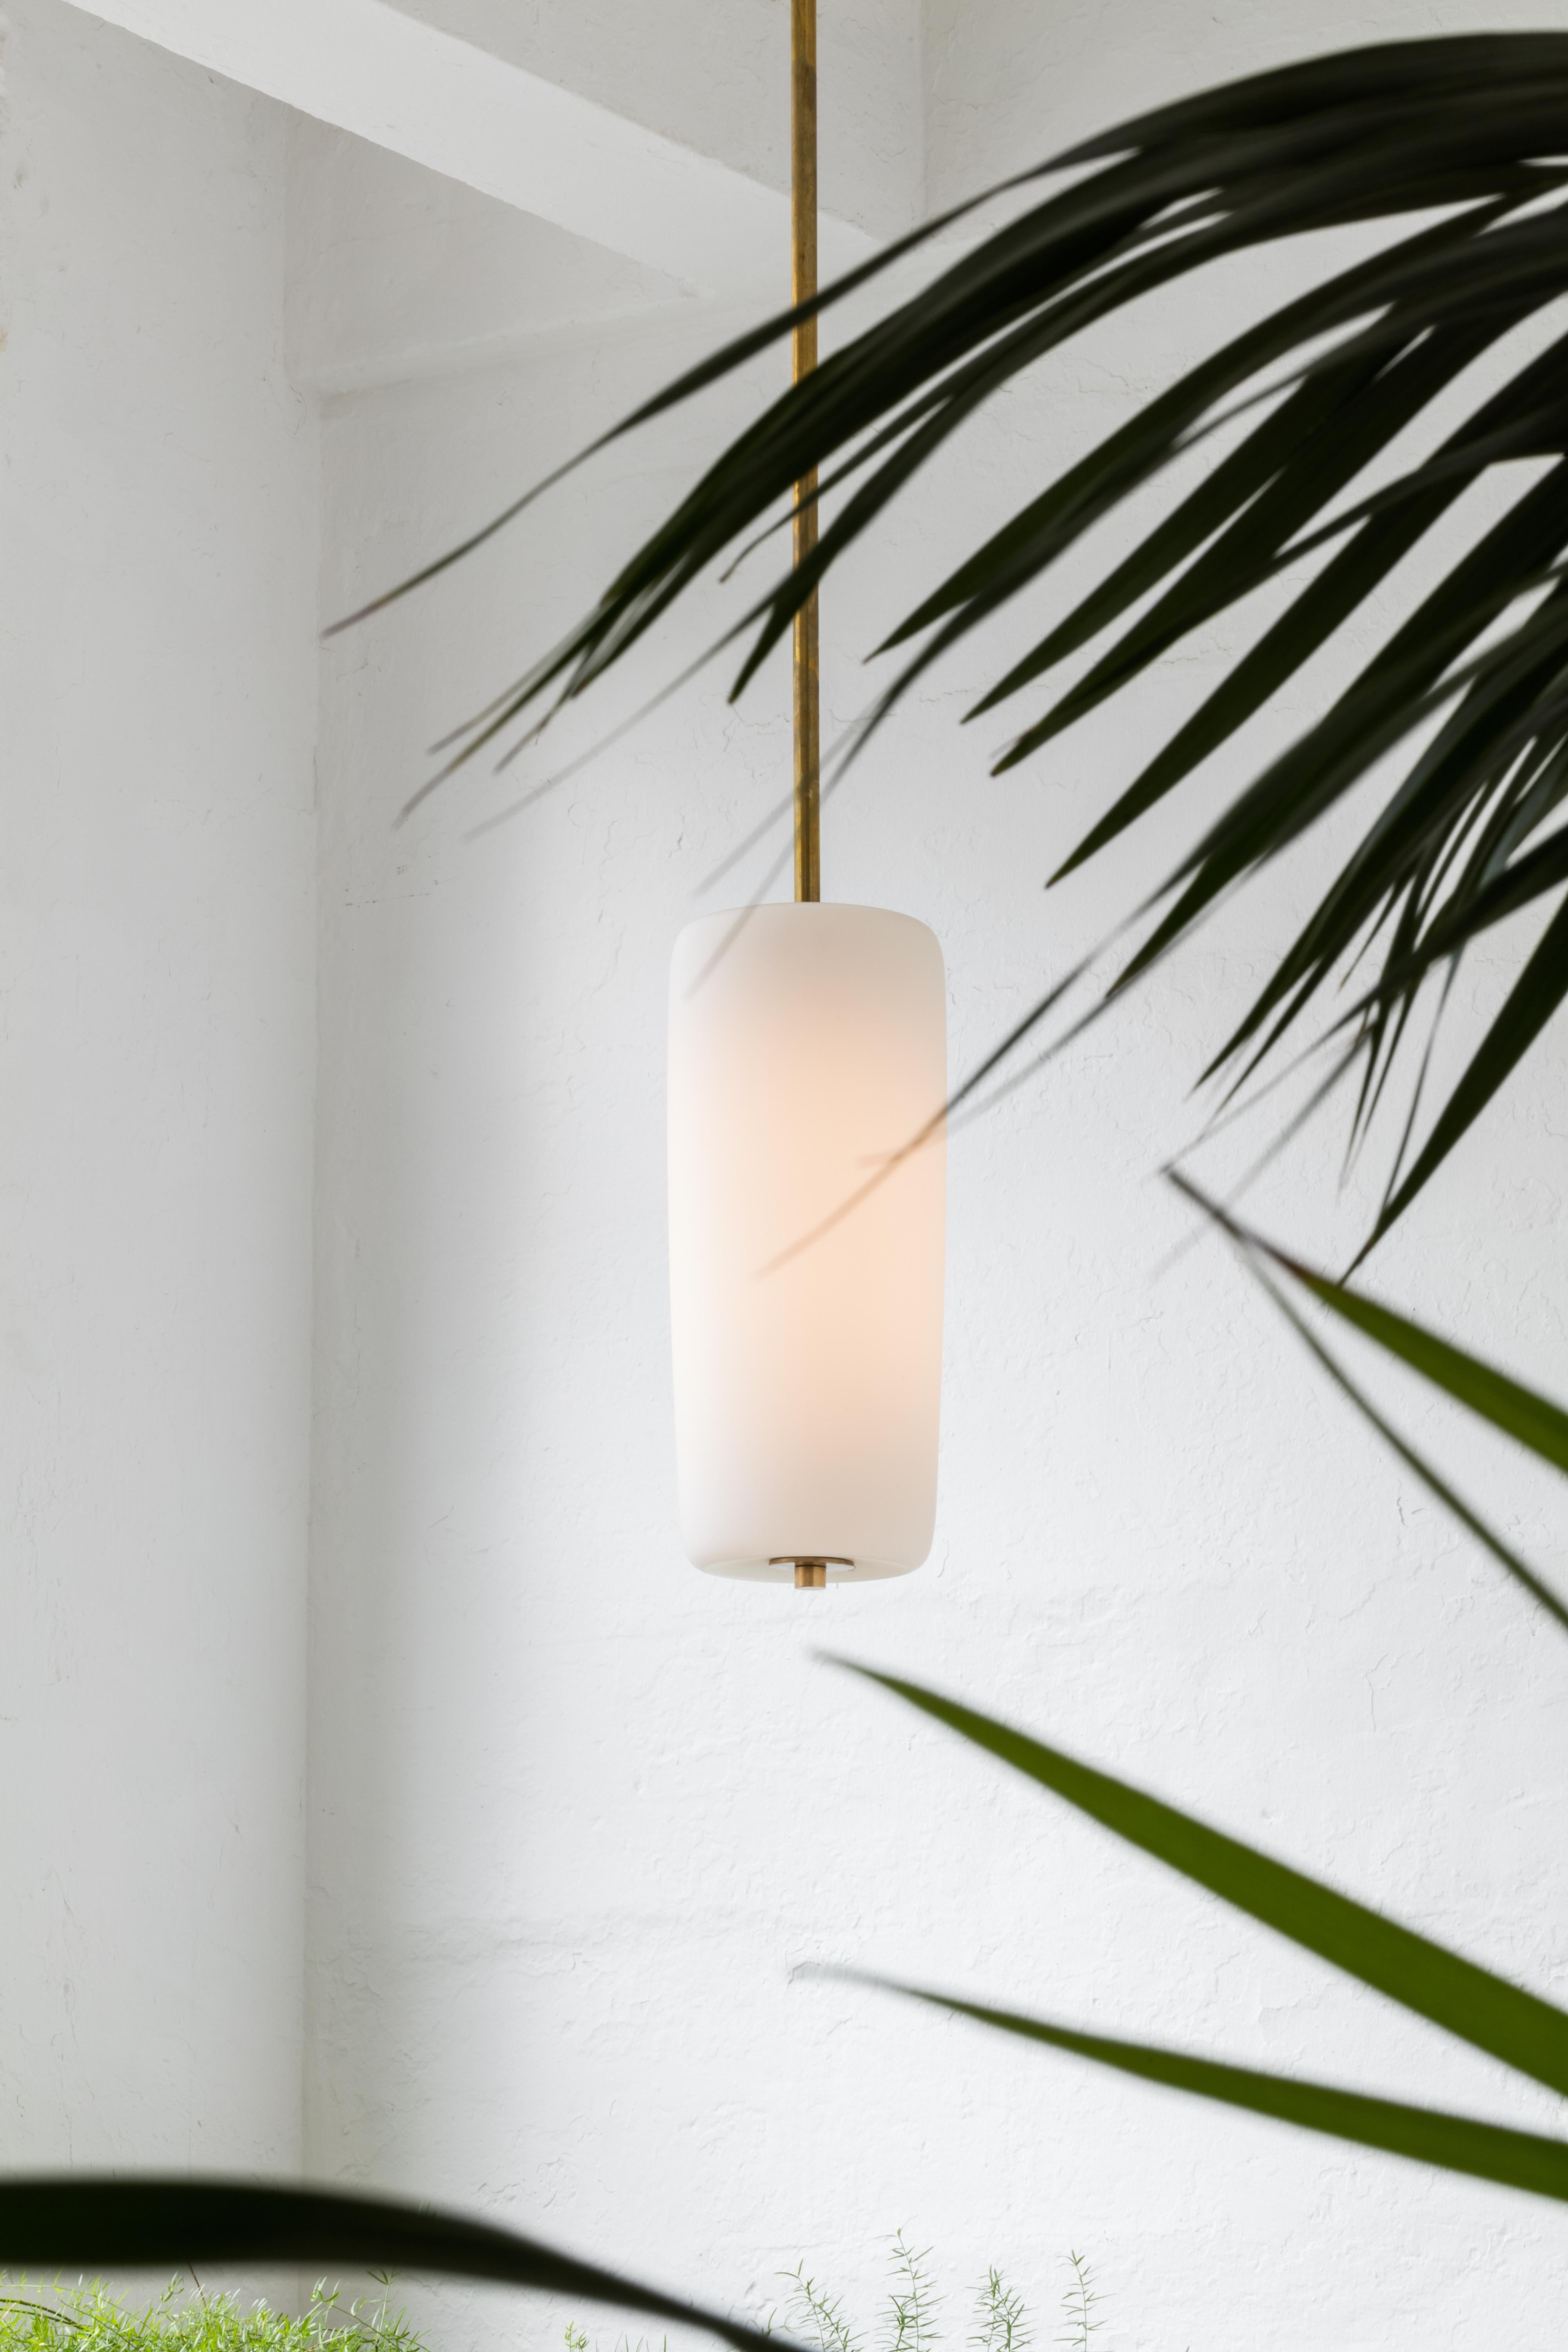 Joinery Pendant 01 by Billy Cotton in Brushed Brass with Acid-Etched Glass (amerikanisch) im Angebot